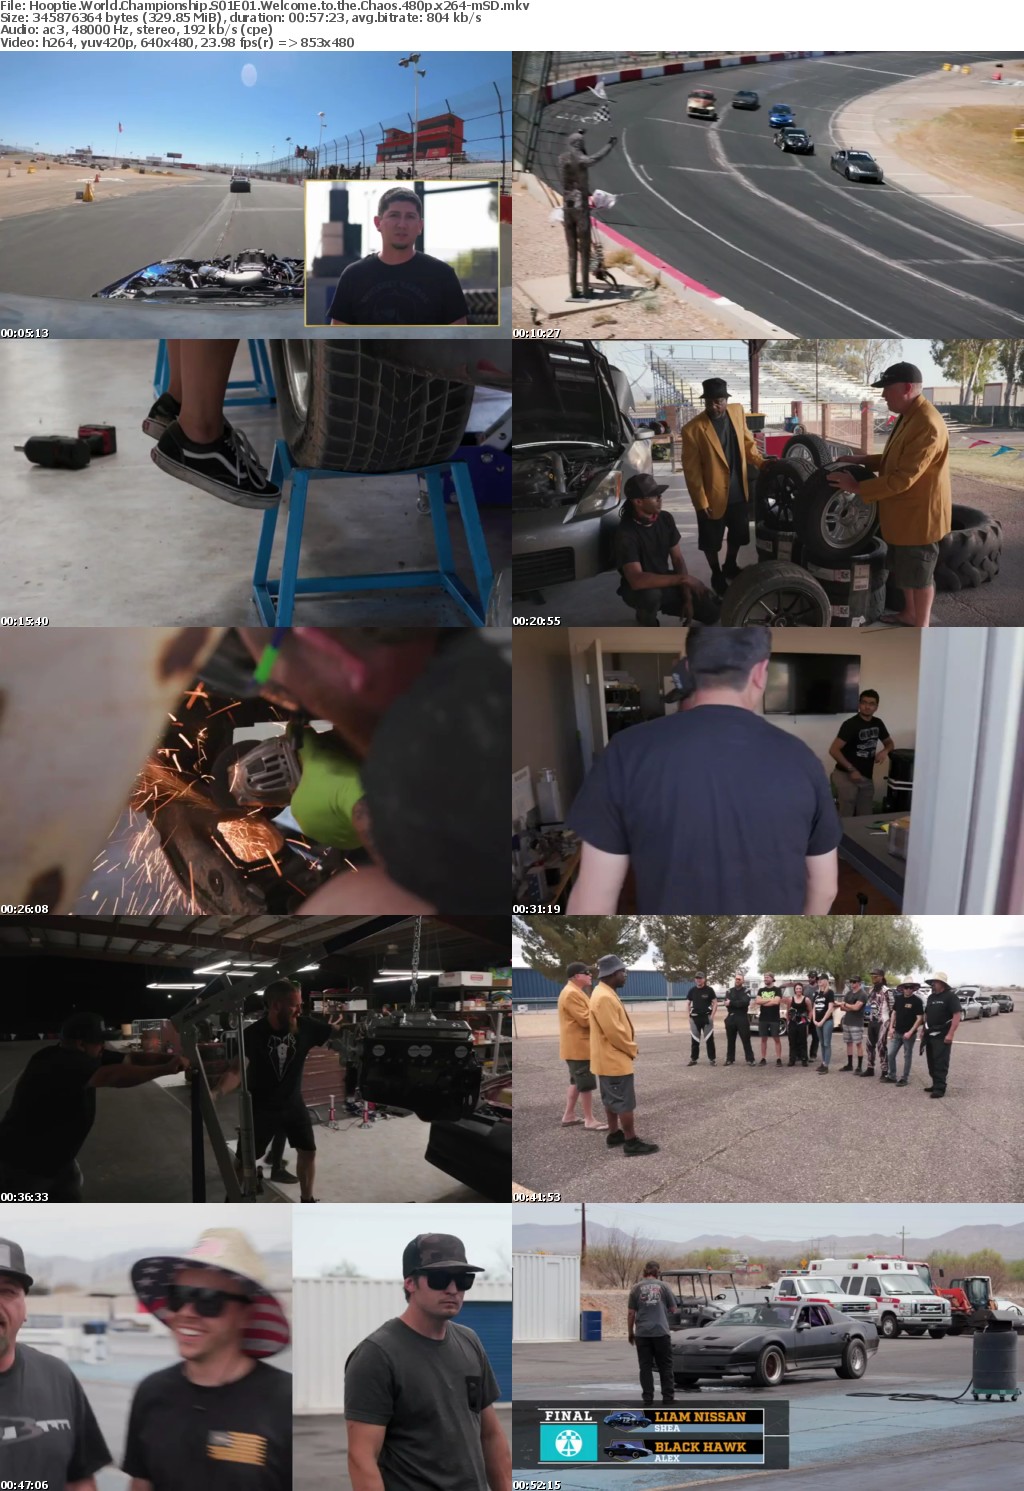 Hooptie World Championship S01E01 Welcome to the Chaos 480p x264-mSD